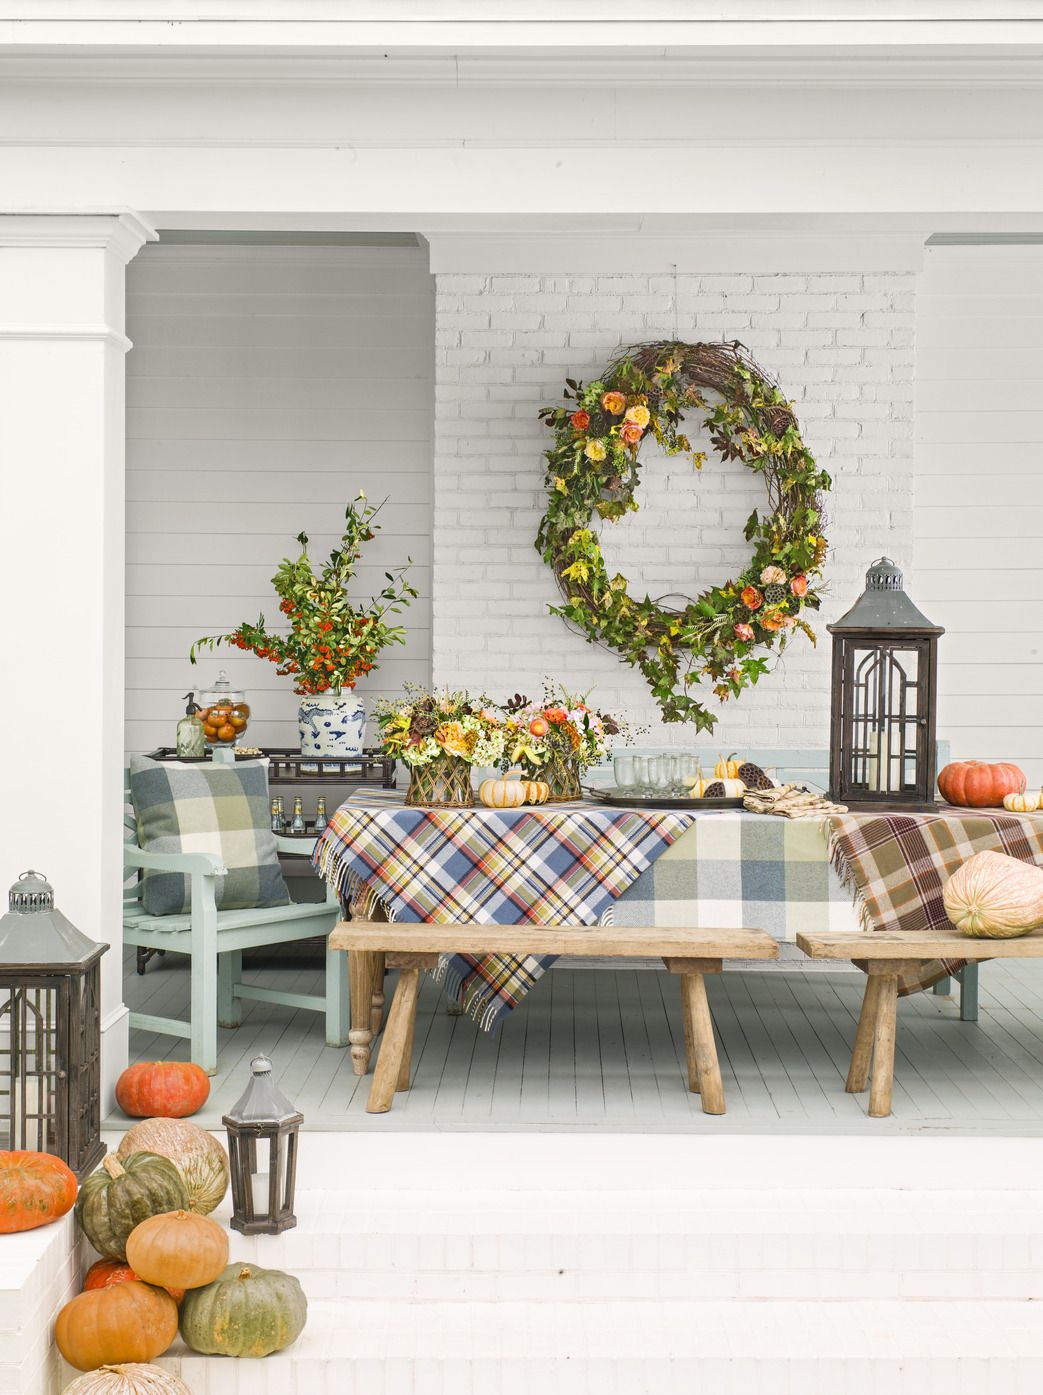 Fall Plaid Grapevine Pumpkin with a Floral Swag Fall Decor Japanese Lantern Florals and Eucalyptus with Fall Ferns